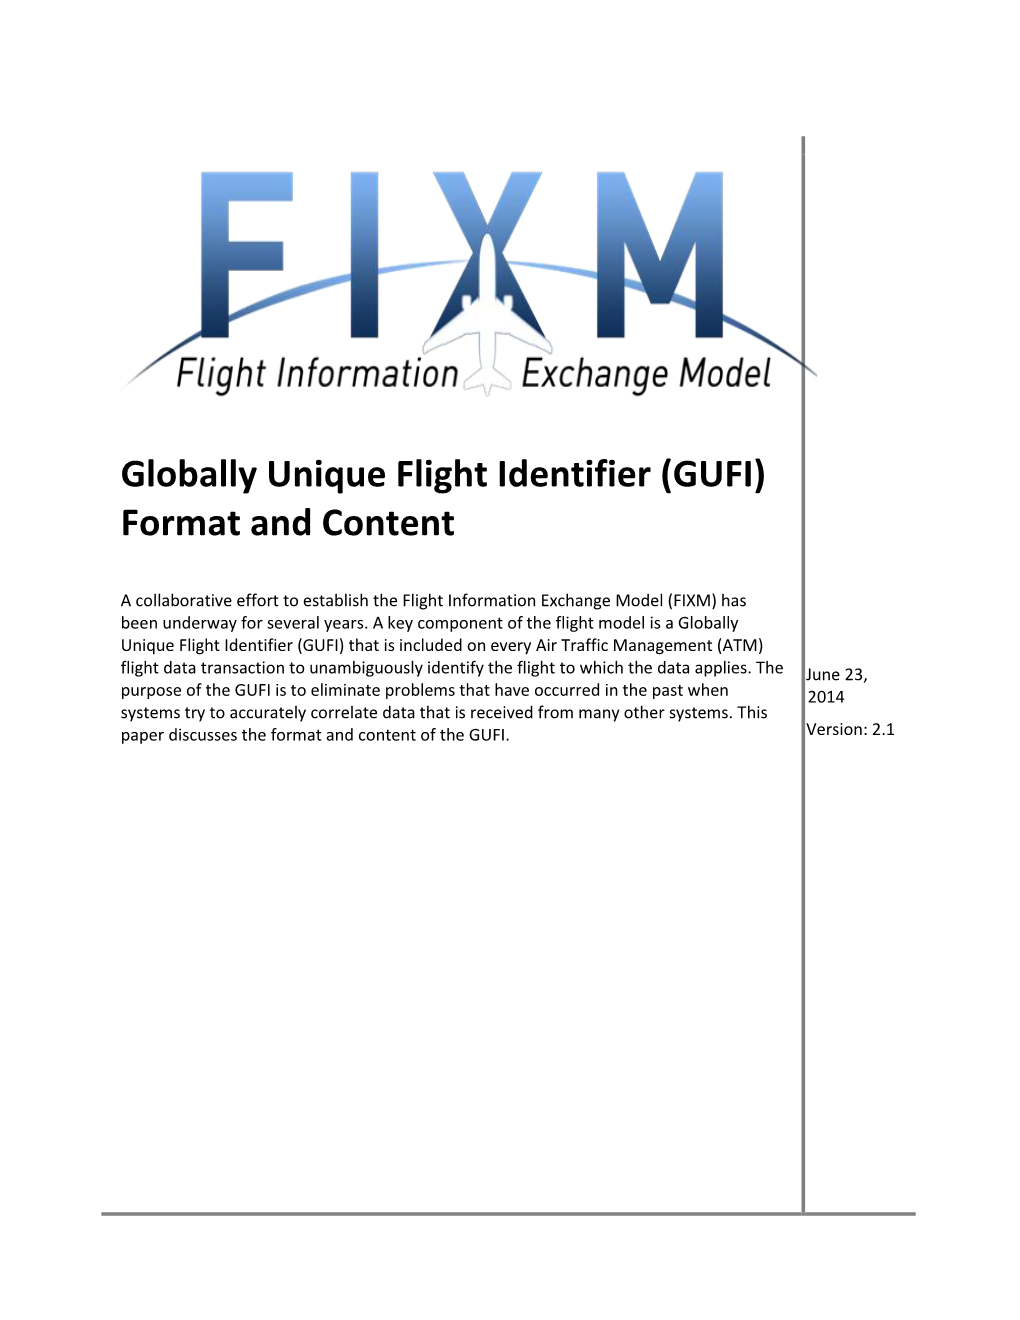 Globally Unique Flight Identifier (GUFI) Format and Content